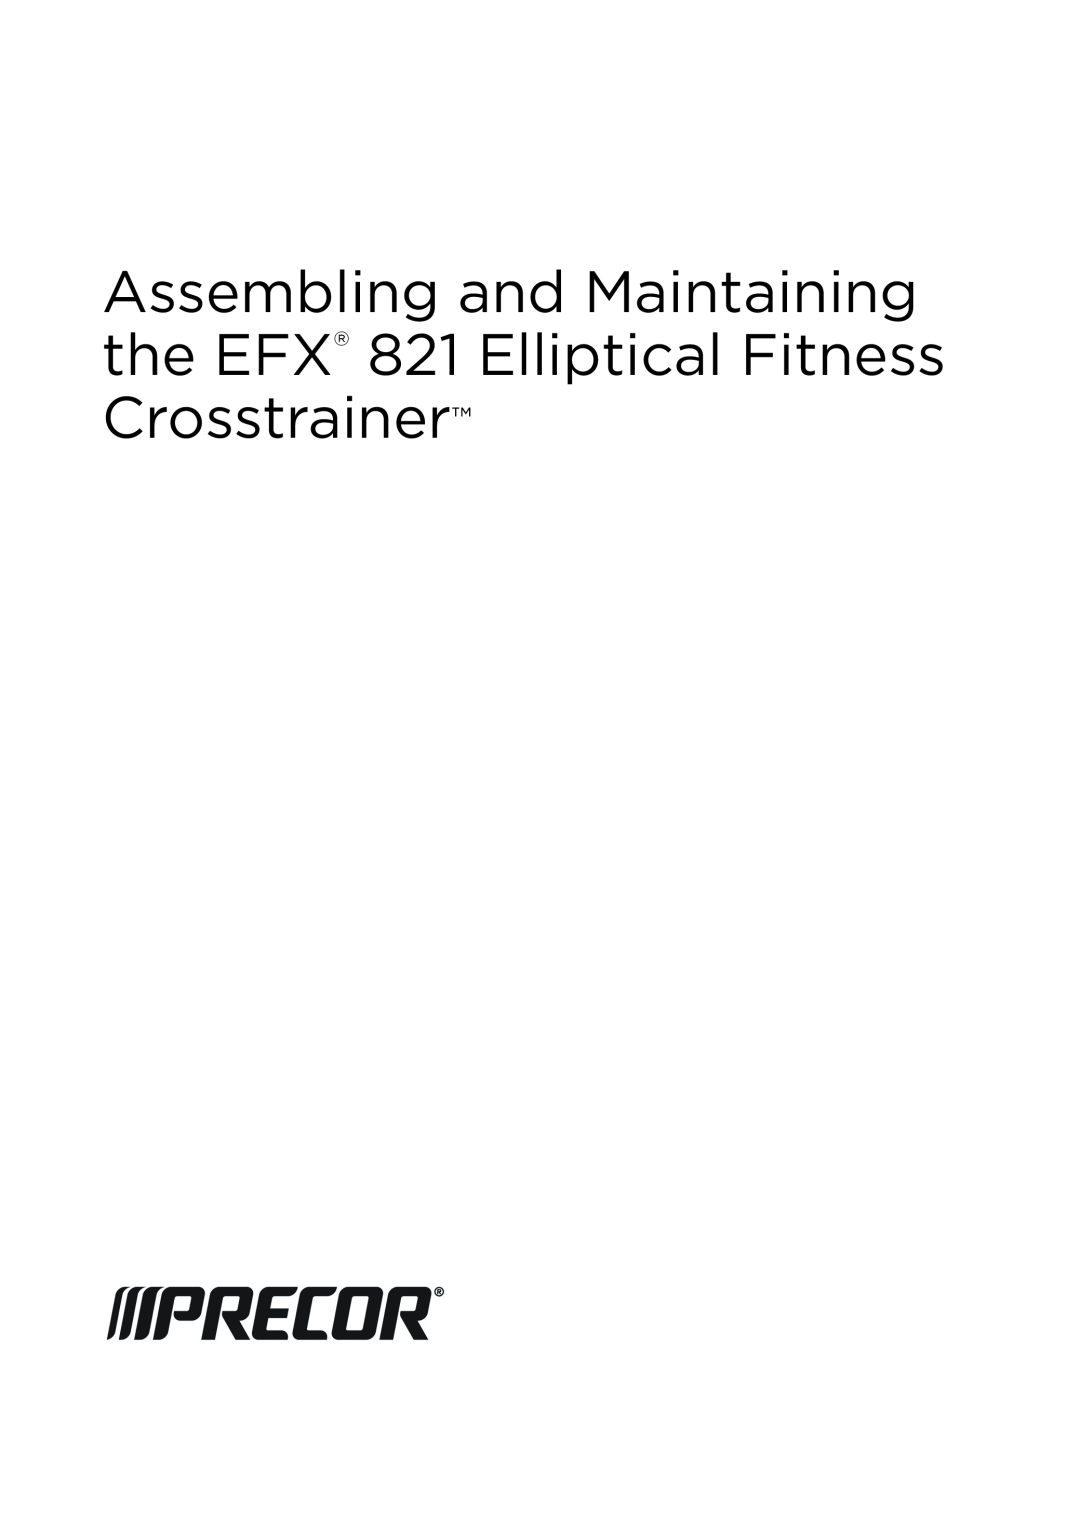 Precor 300753-201 manual Assembling and Maintaining the EFX‰ 821 Elliptical Fitness, Crosstrainer 